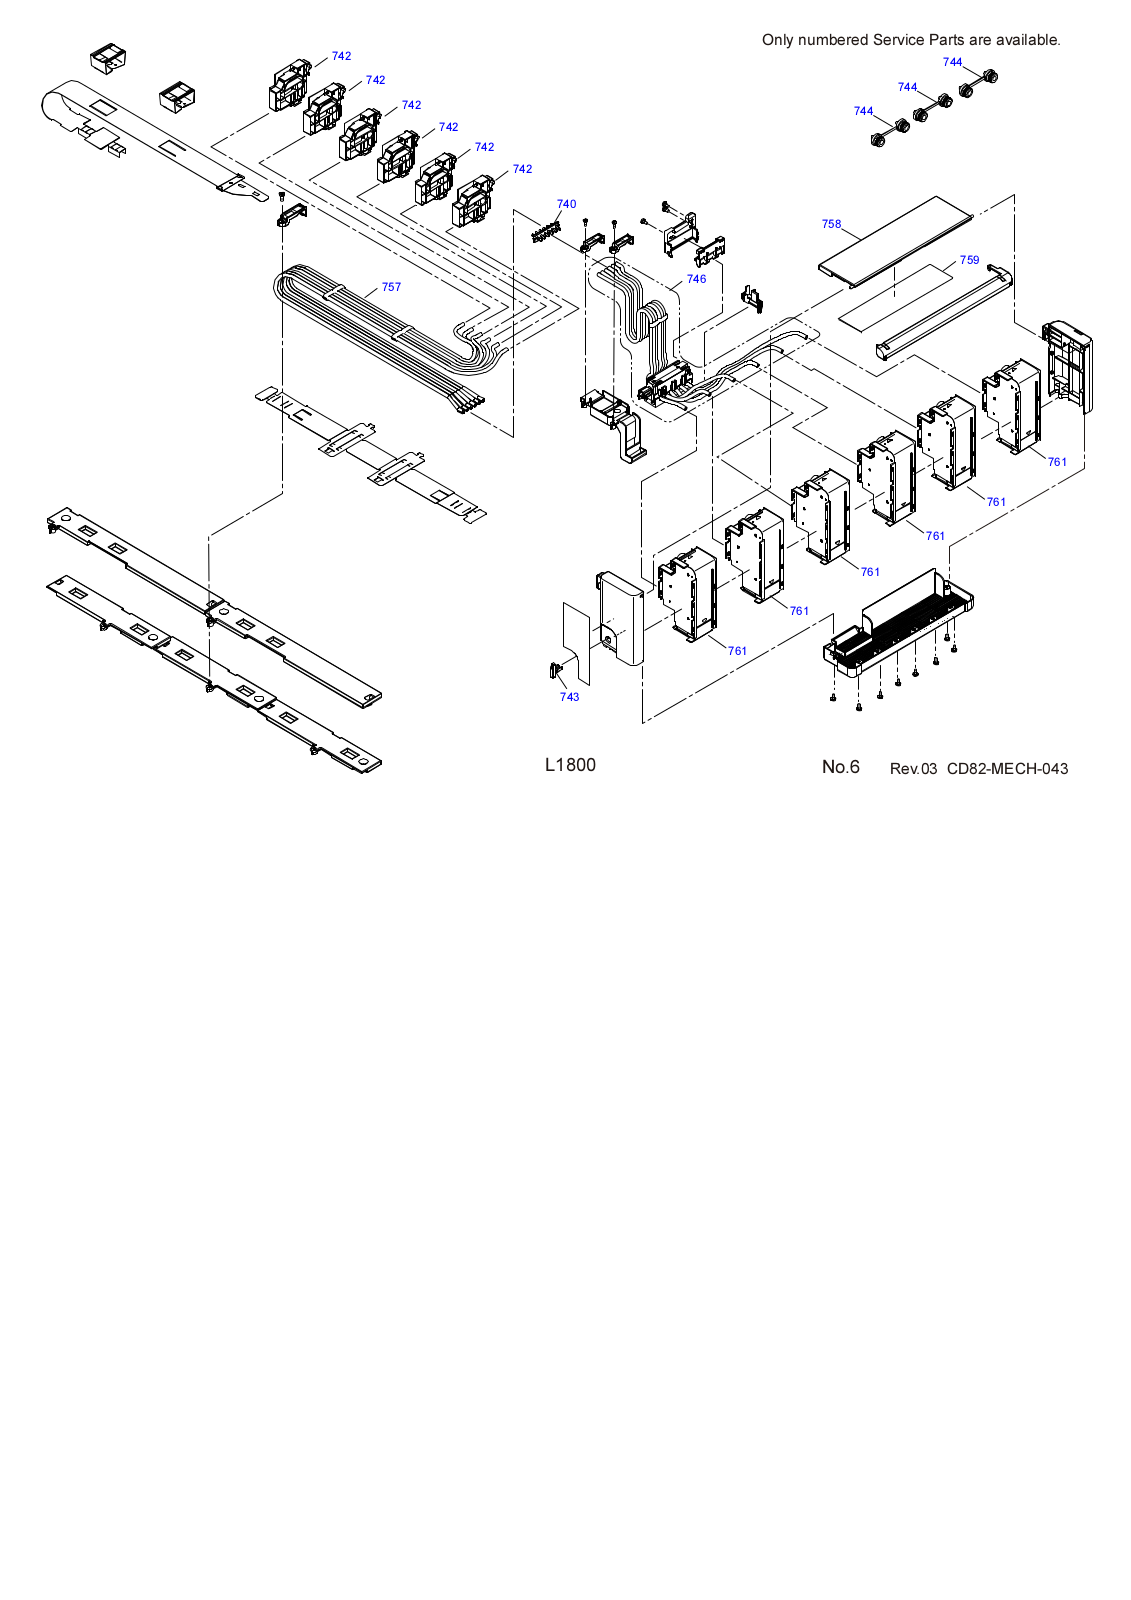 Epson L1800 Exploded Diagrams 6